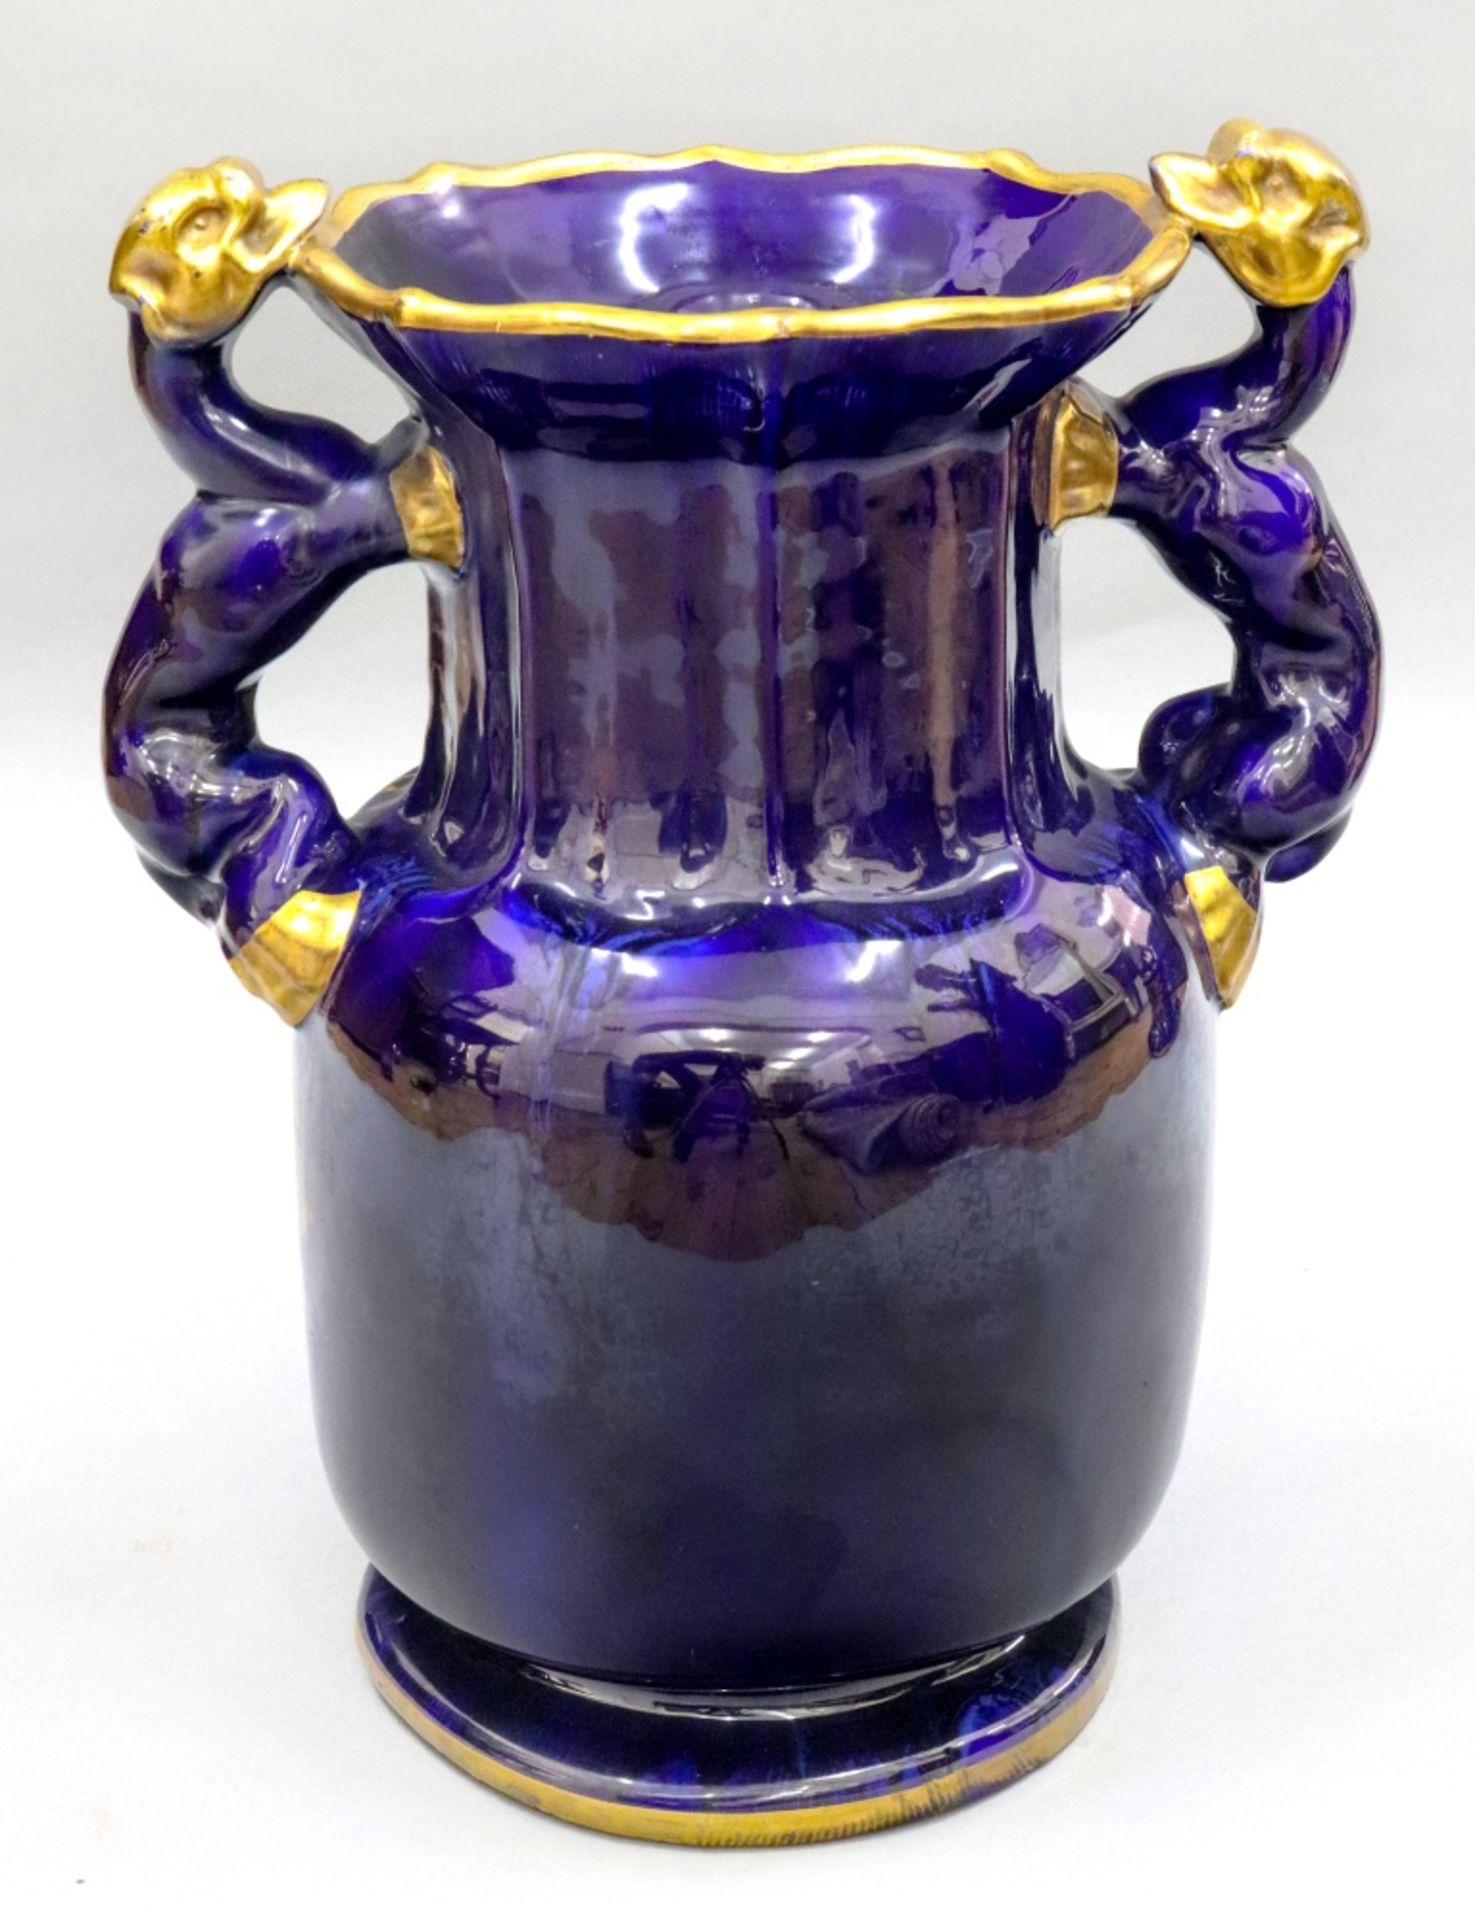 A Masons Ironstone vase, circa 1815 - 20, with twin dragon side handles, - Image 2 of 2